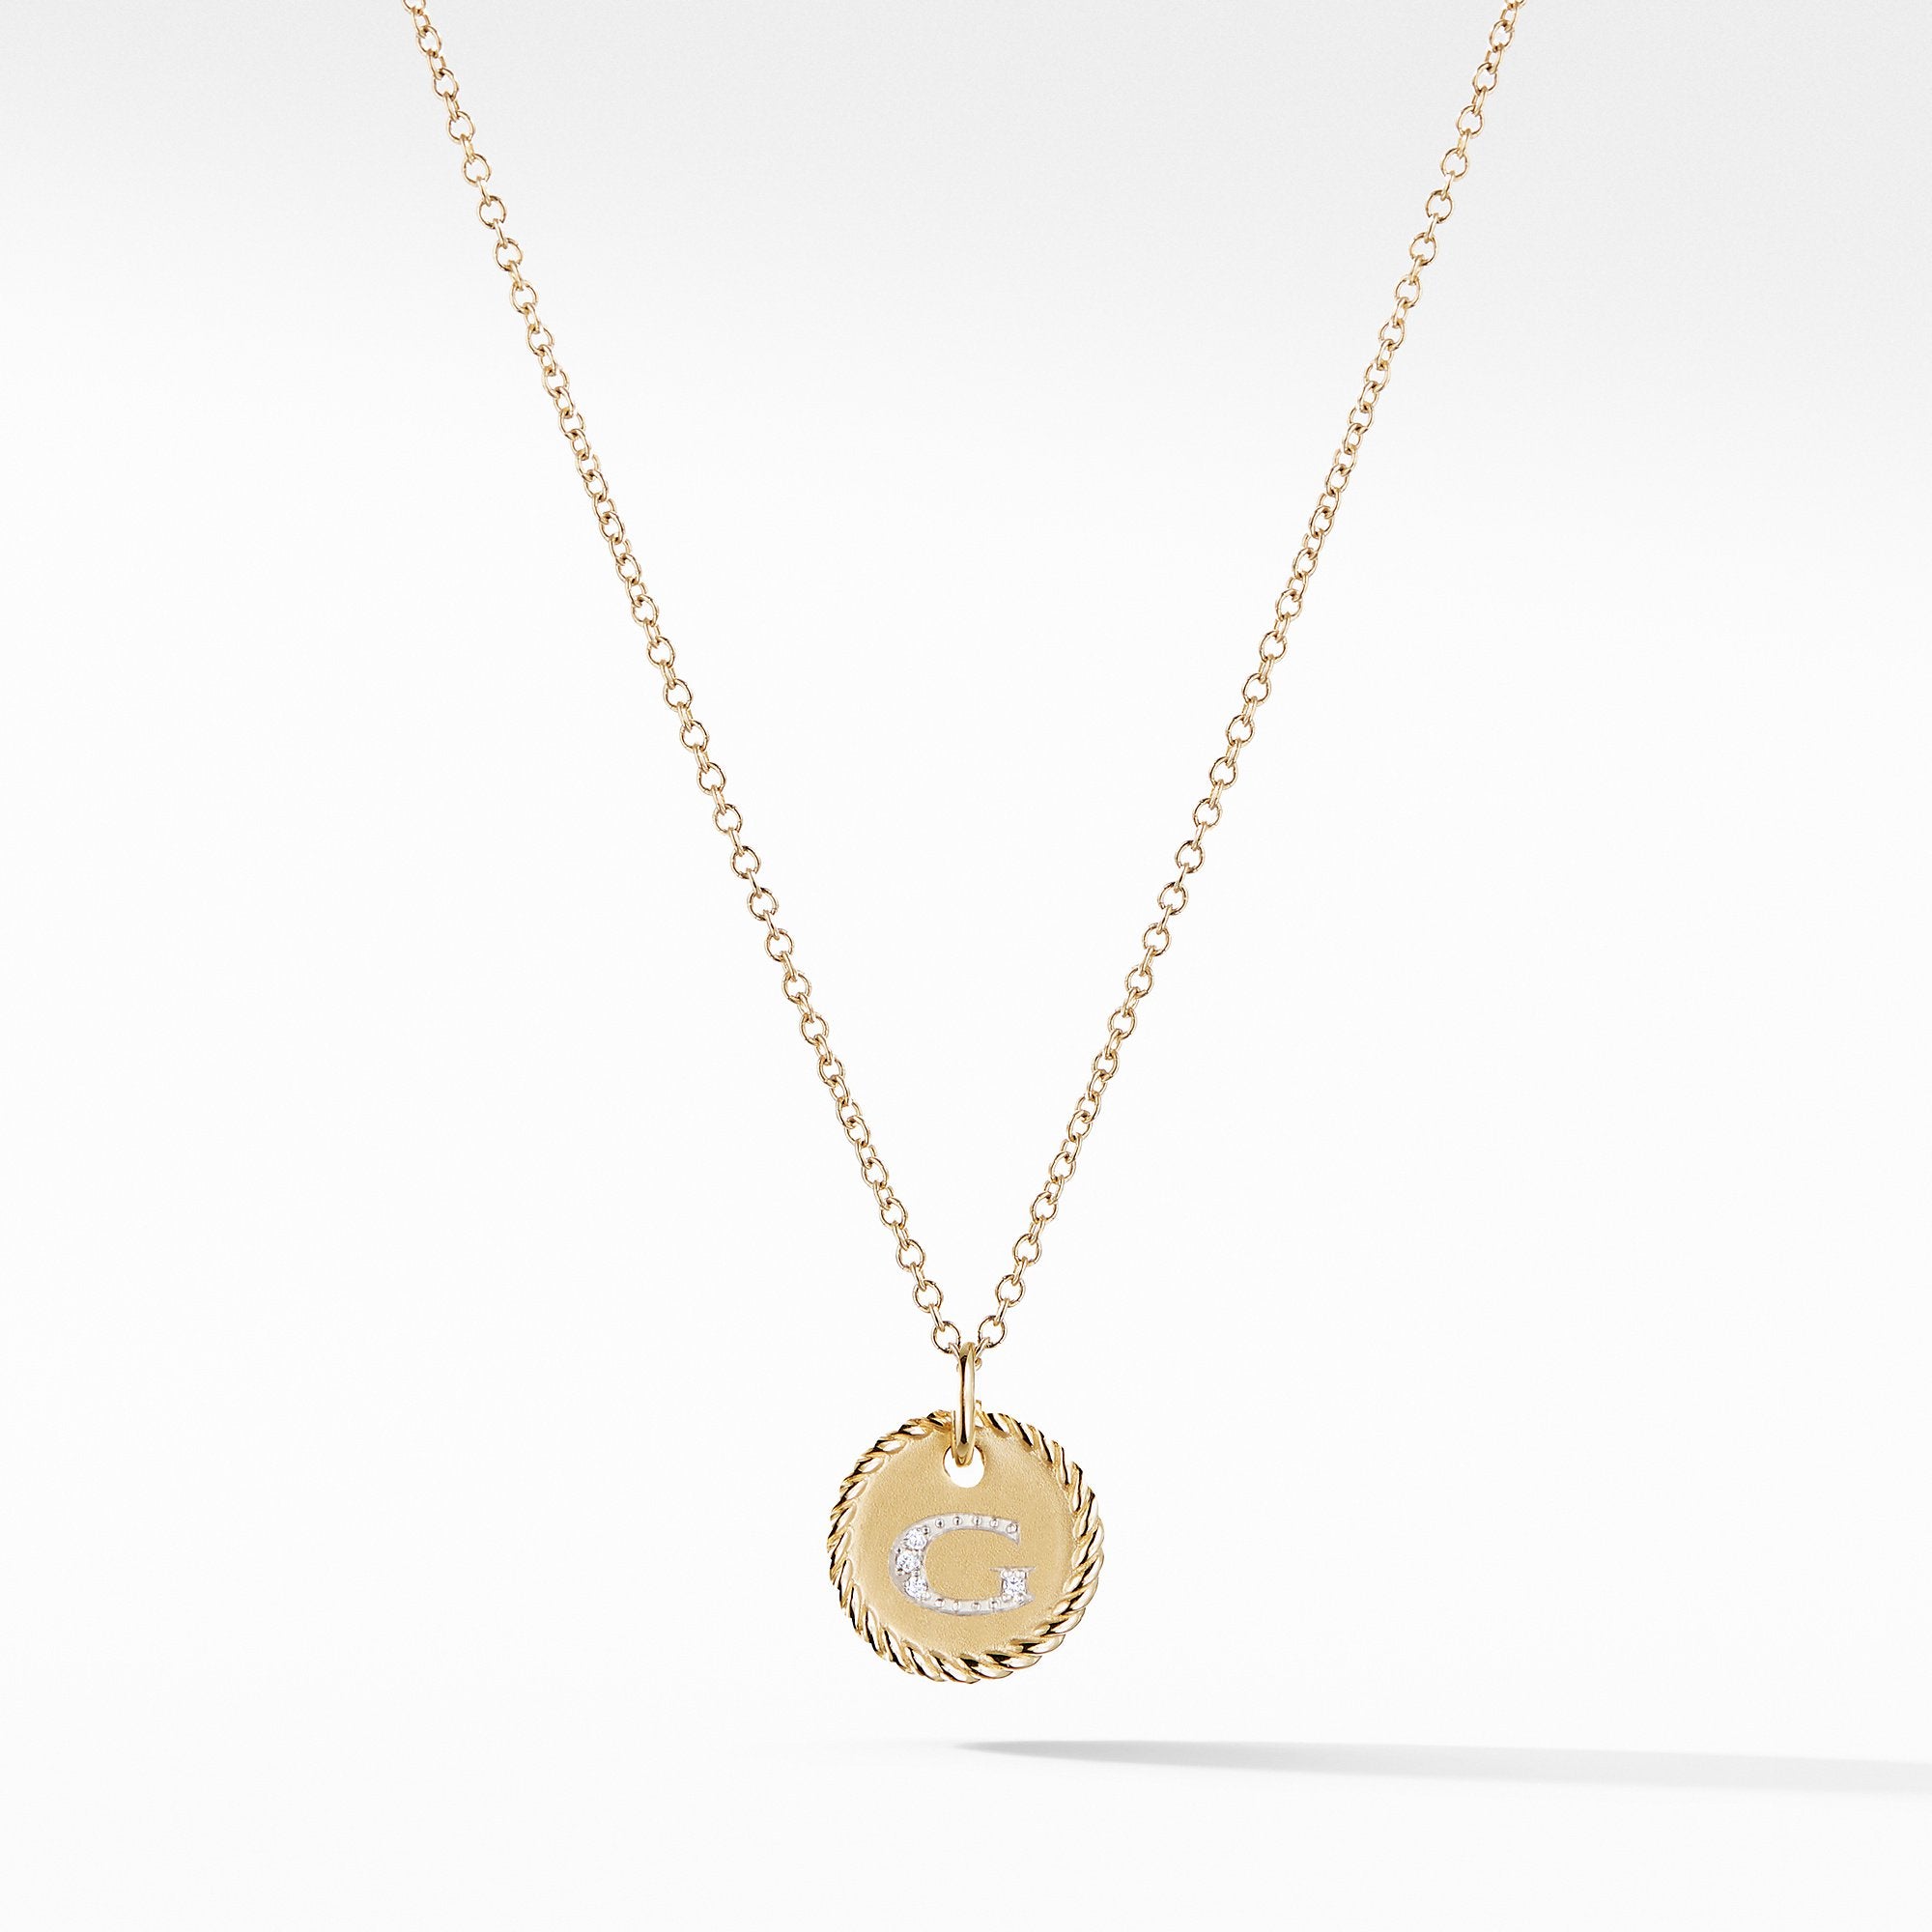 "G" Pendant with Diamonds in Gold on Chain